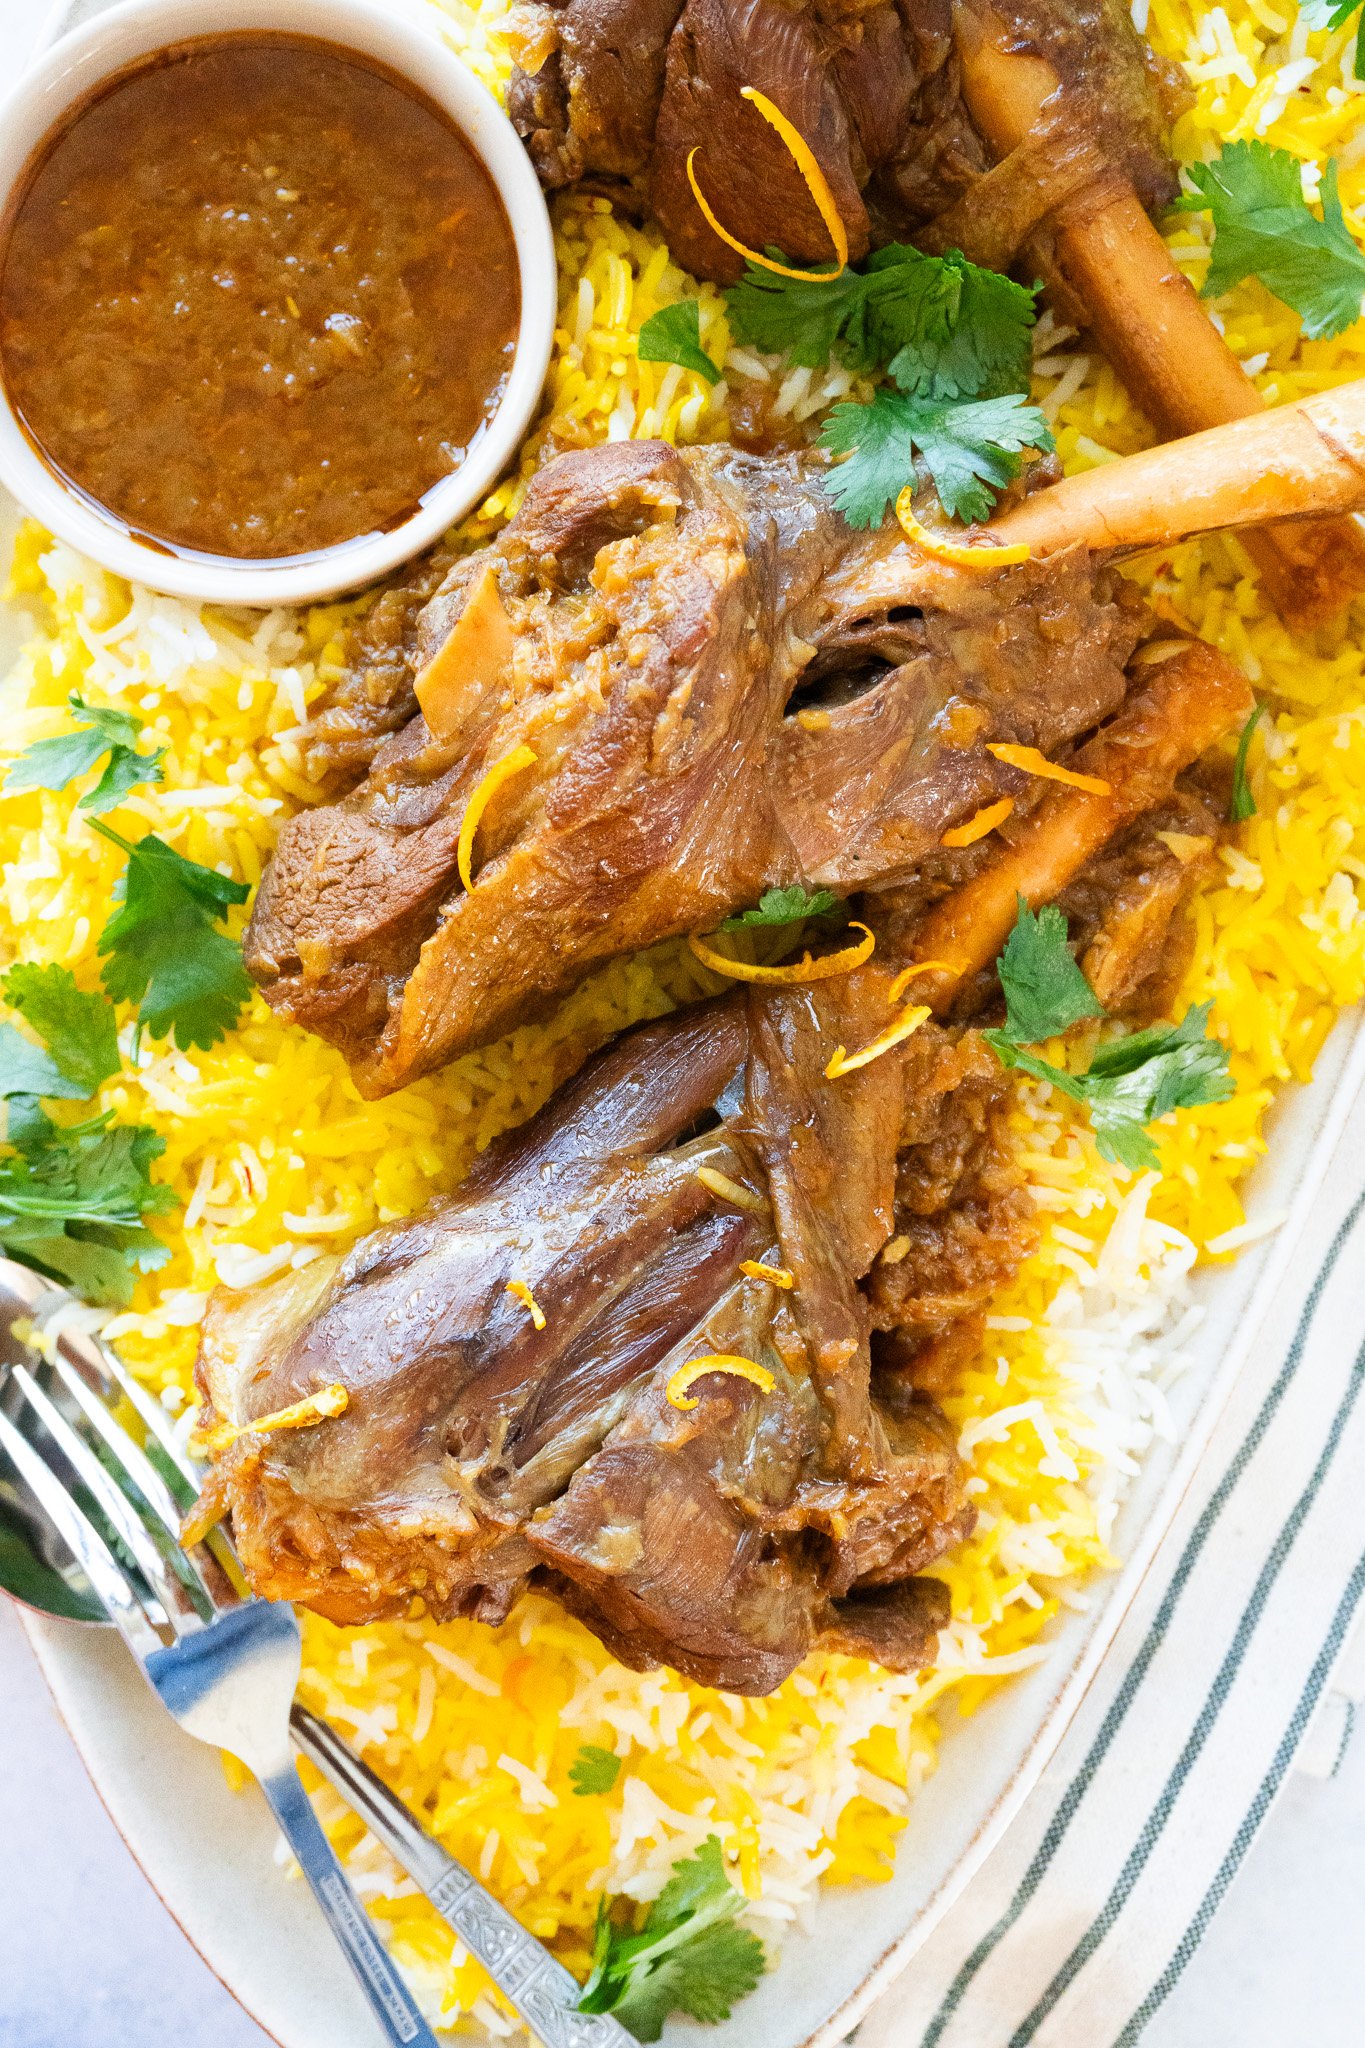 Mouthwatering Persian Lamb Shank - Tender lamb shank infused with aromatic spices, ready to be savored.